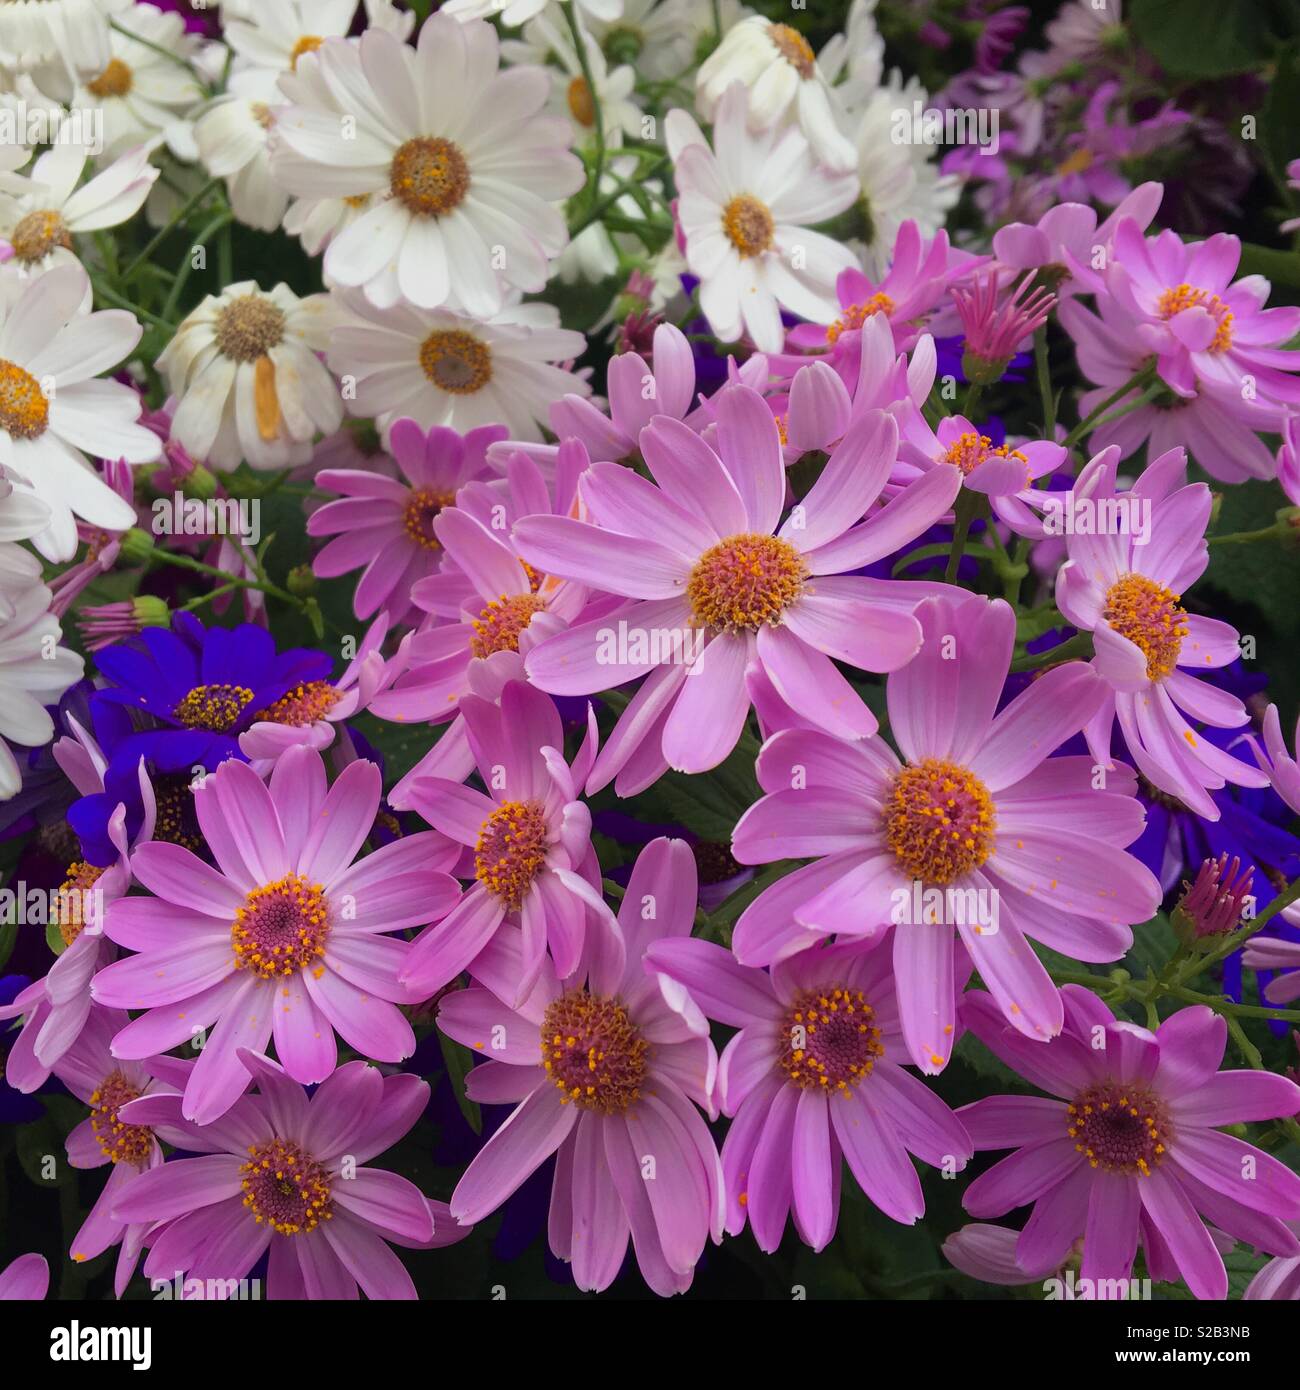 Cineraria flowers in bloom Stock Photo